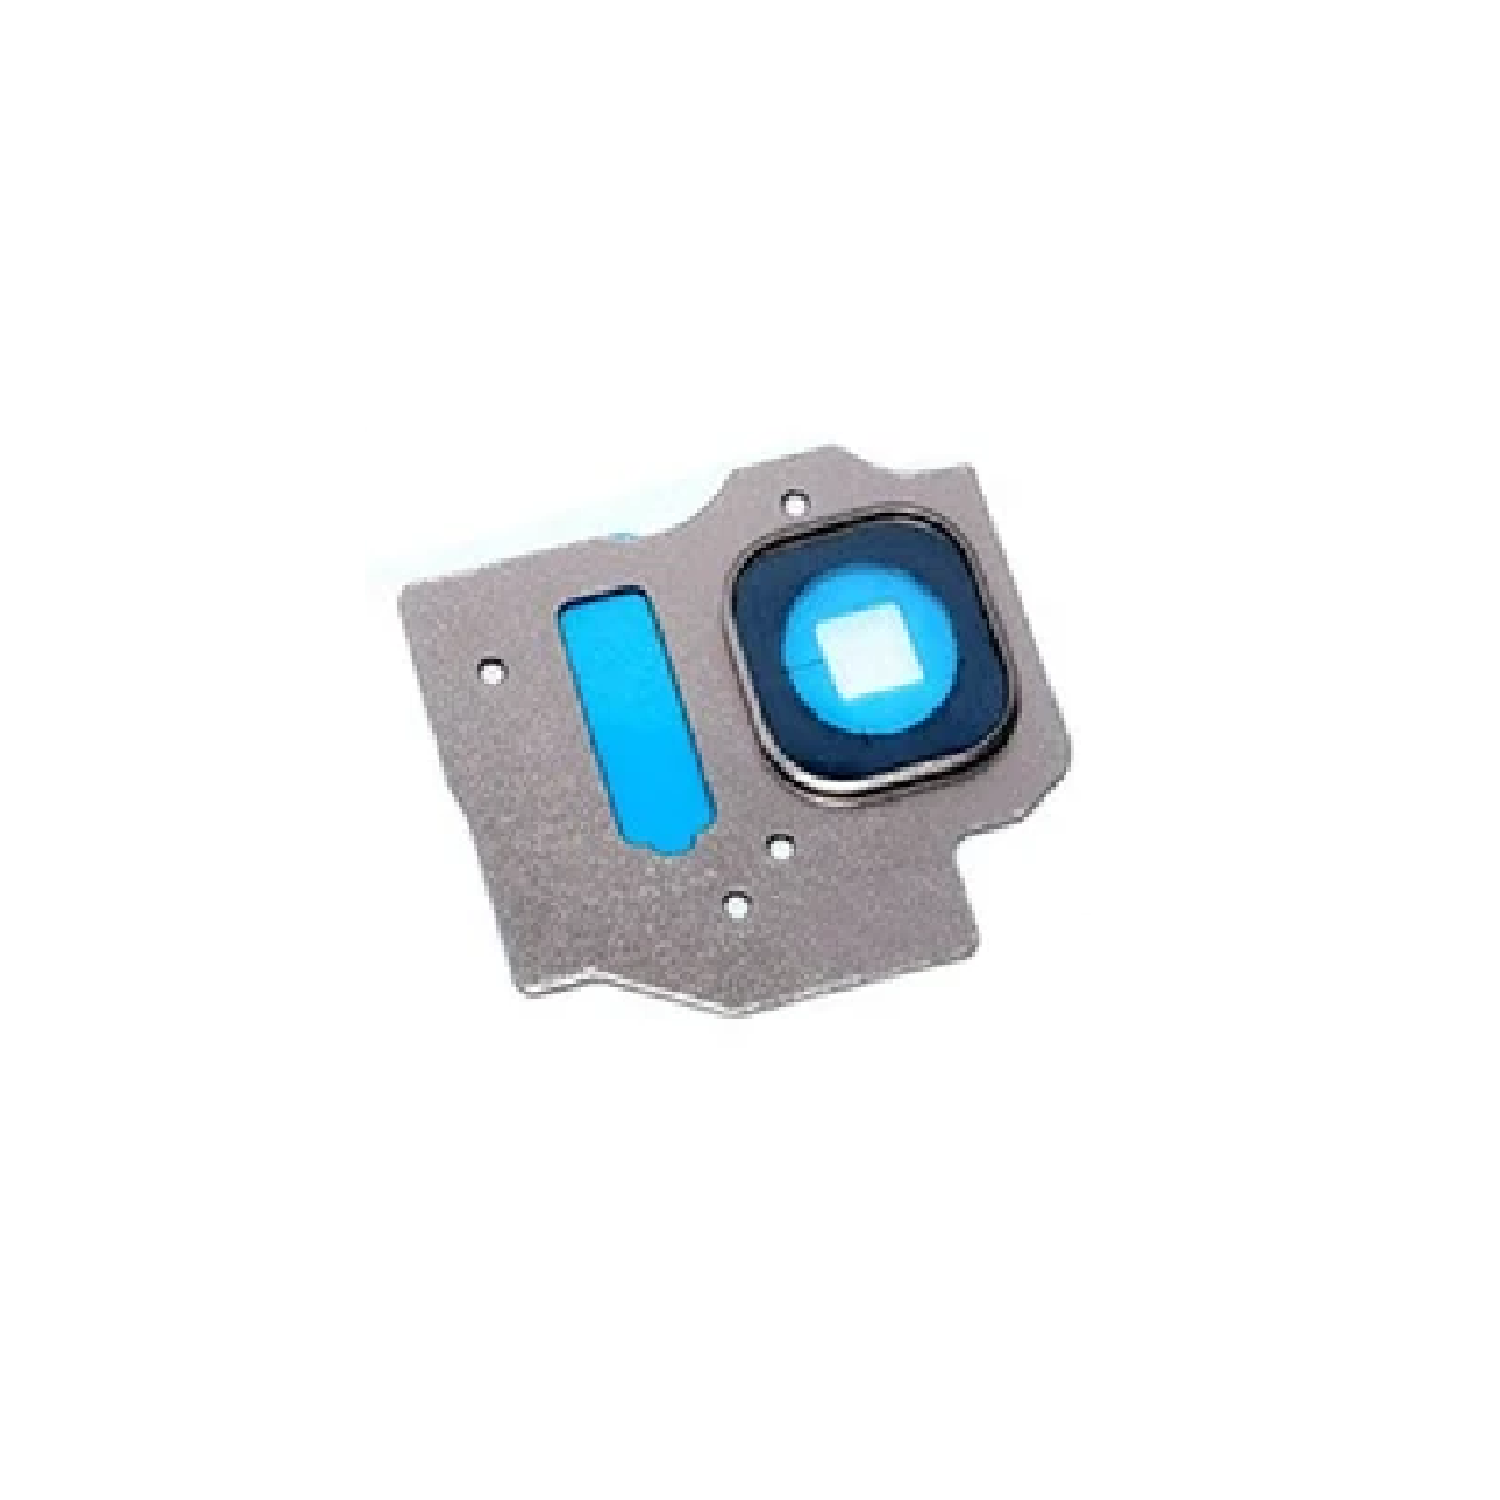 Back Camera Lens For Samsung Galaxy S8 Plus G9550 G955F G955WA [Pro-Mobile]